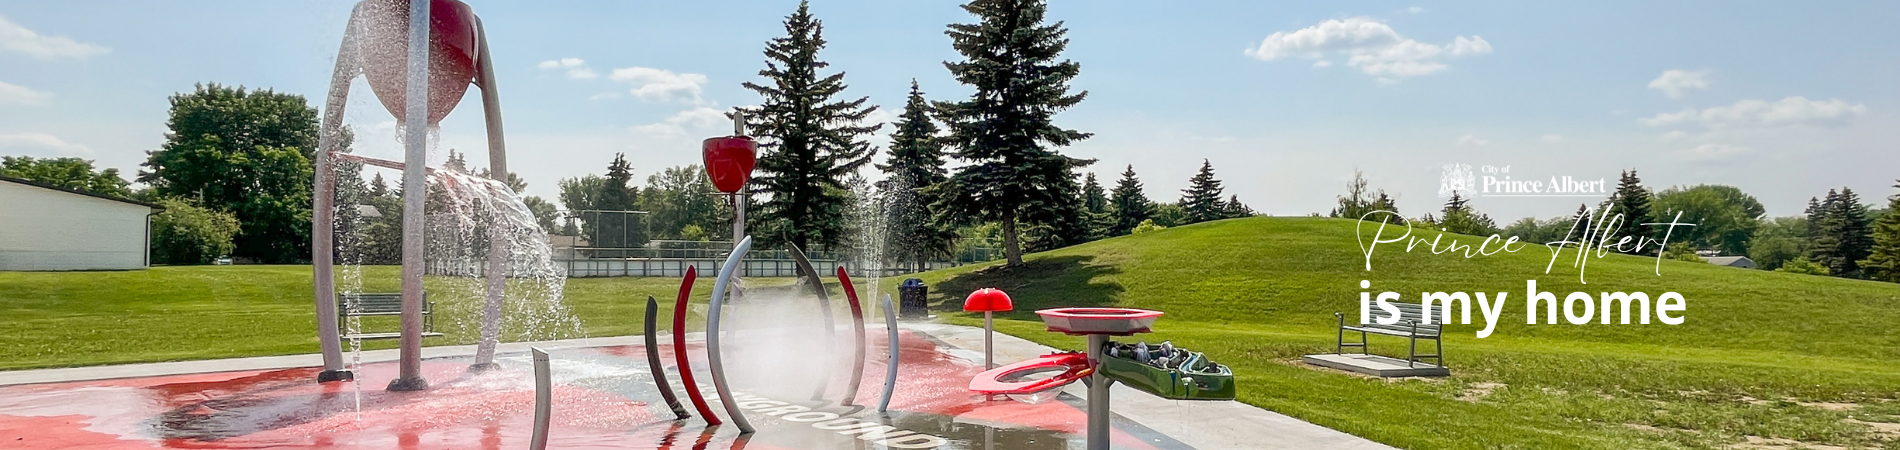 Spray Park in Crescent Heights